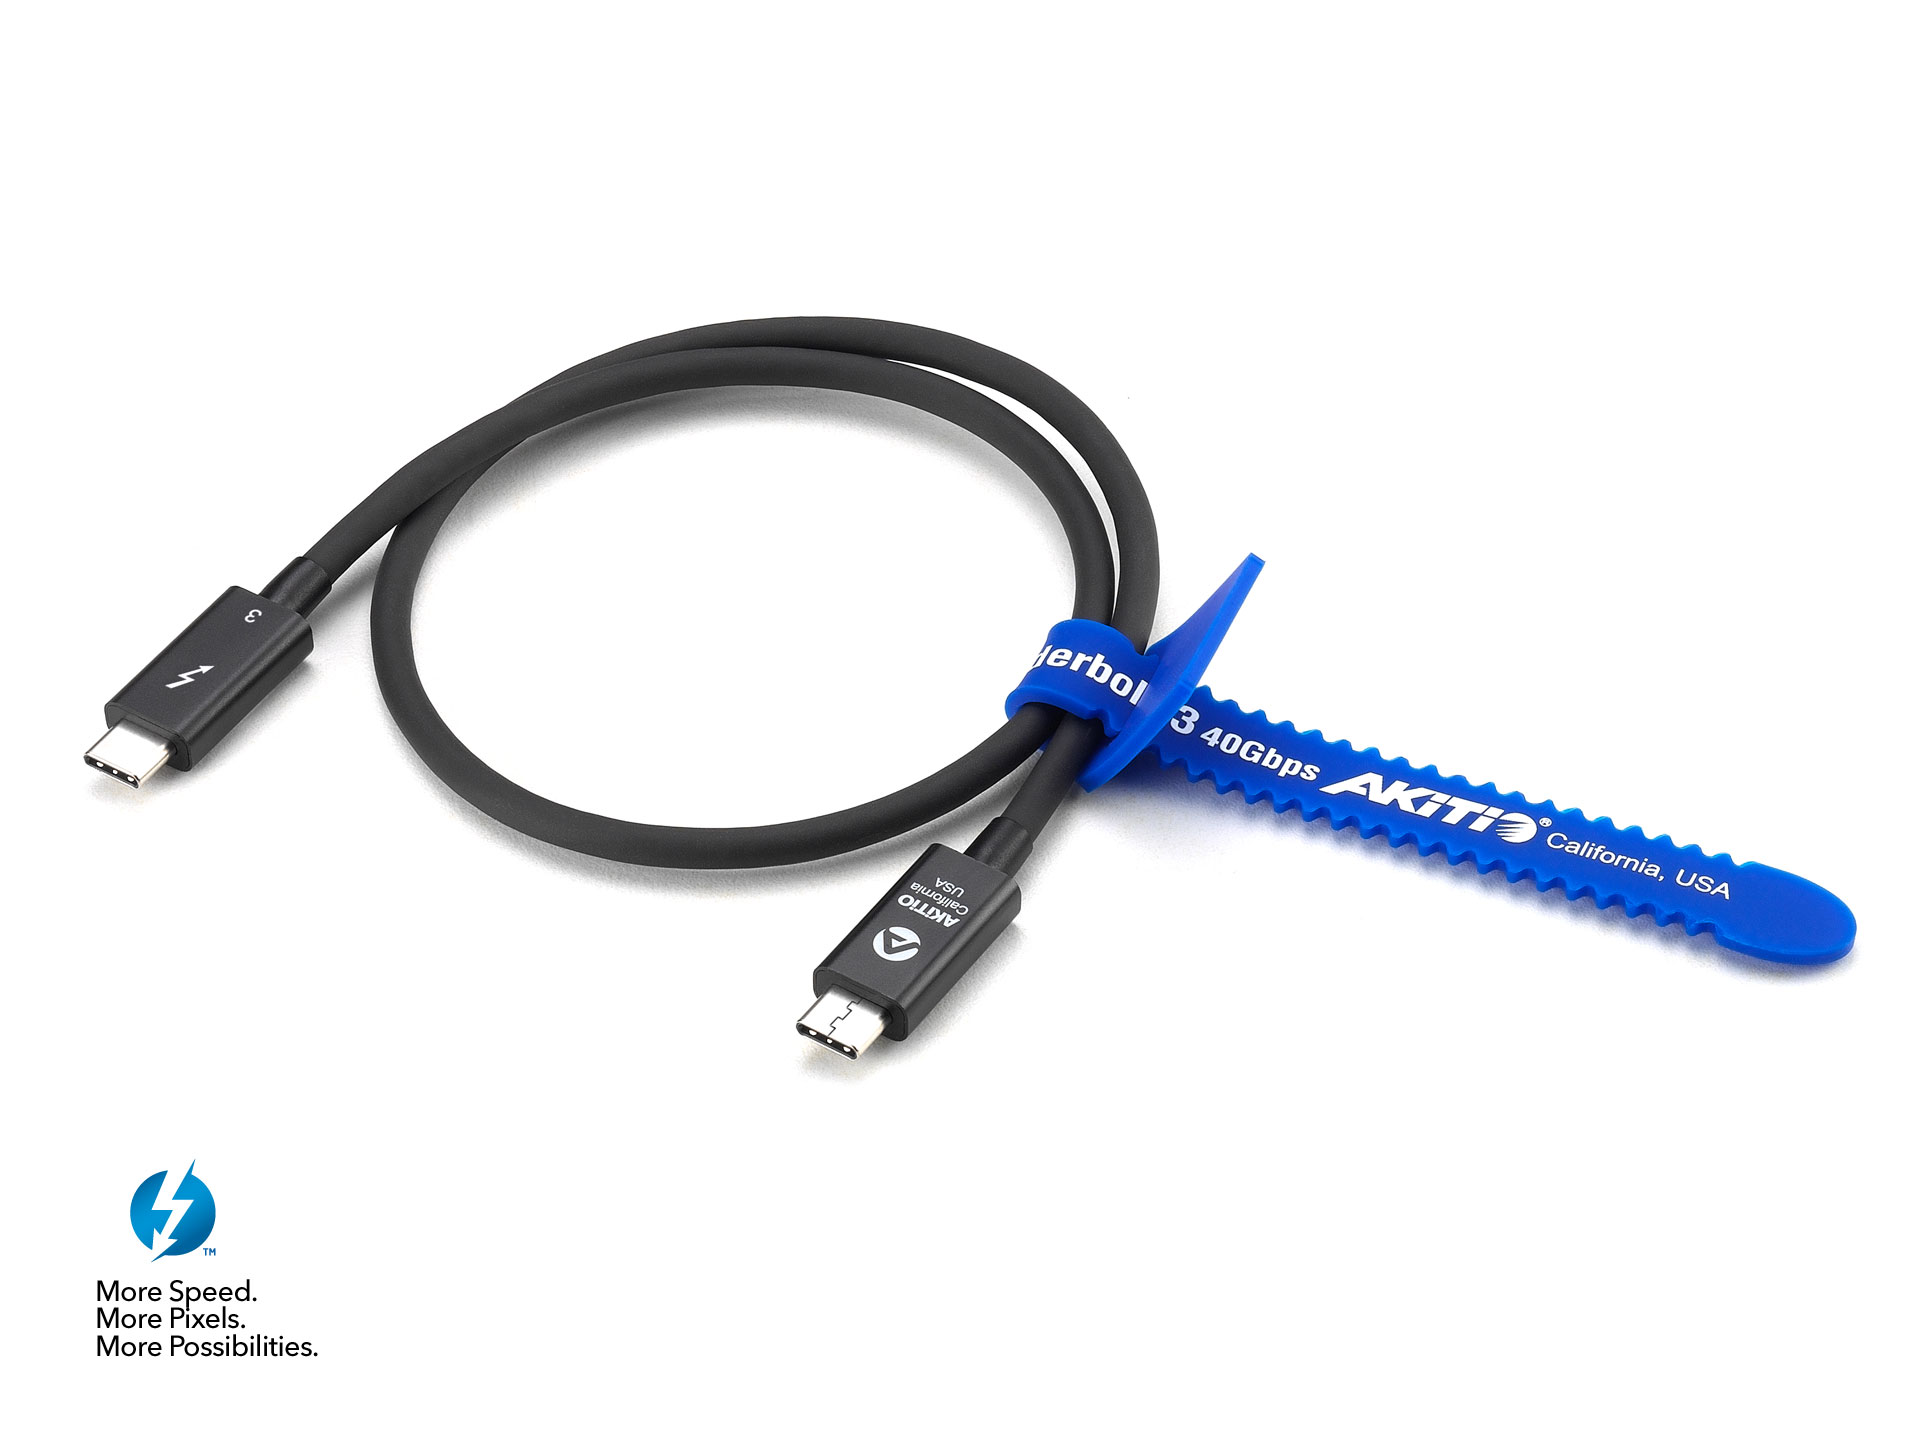 akitio thunderbolt3 cable 50cm cable tie